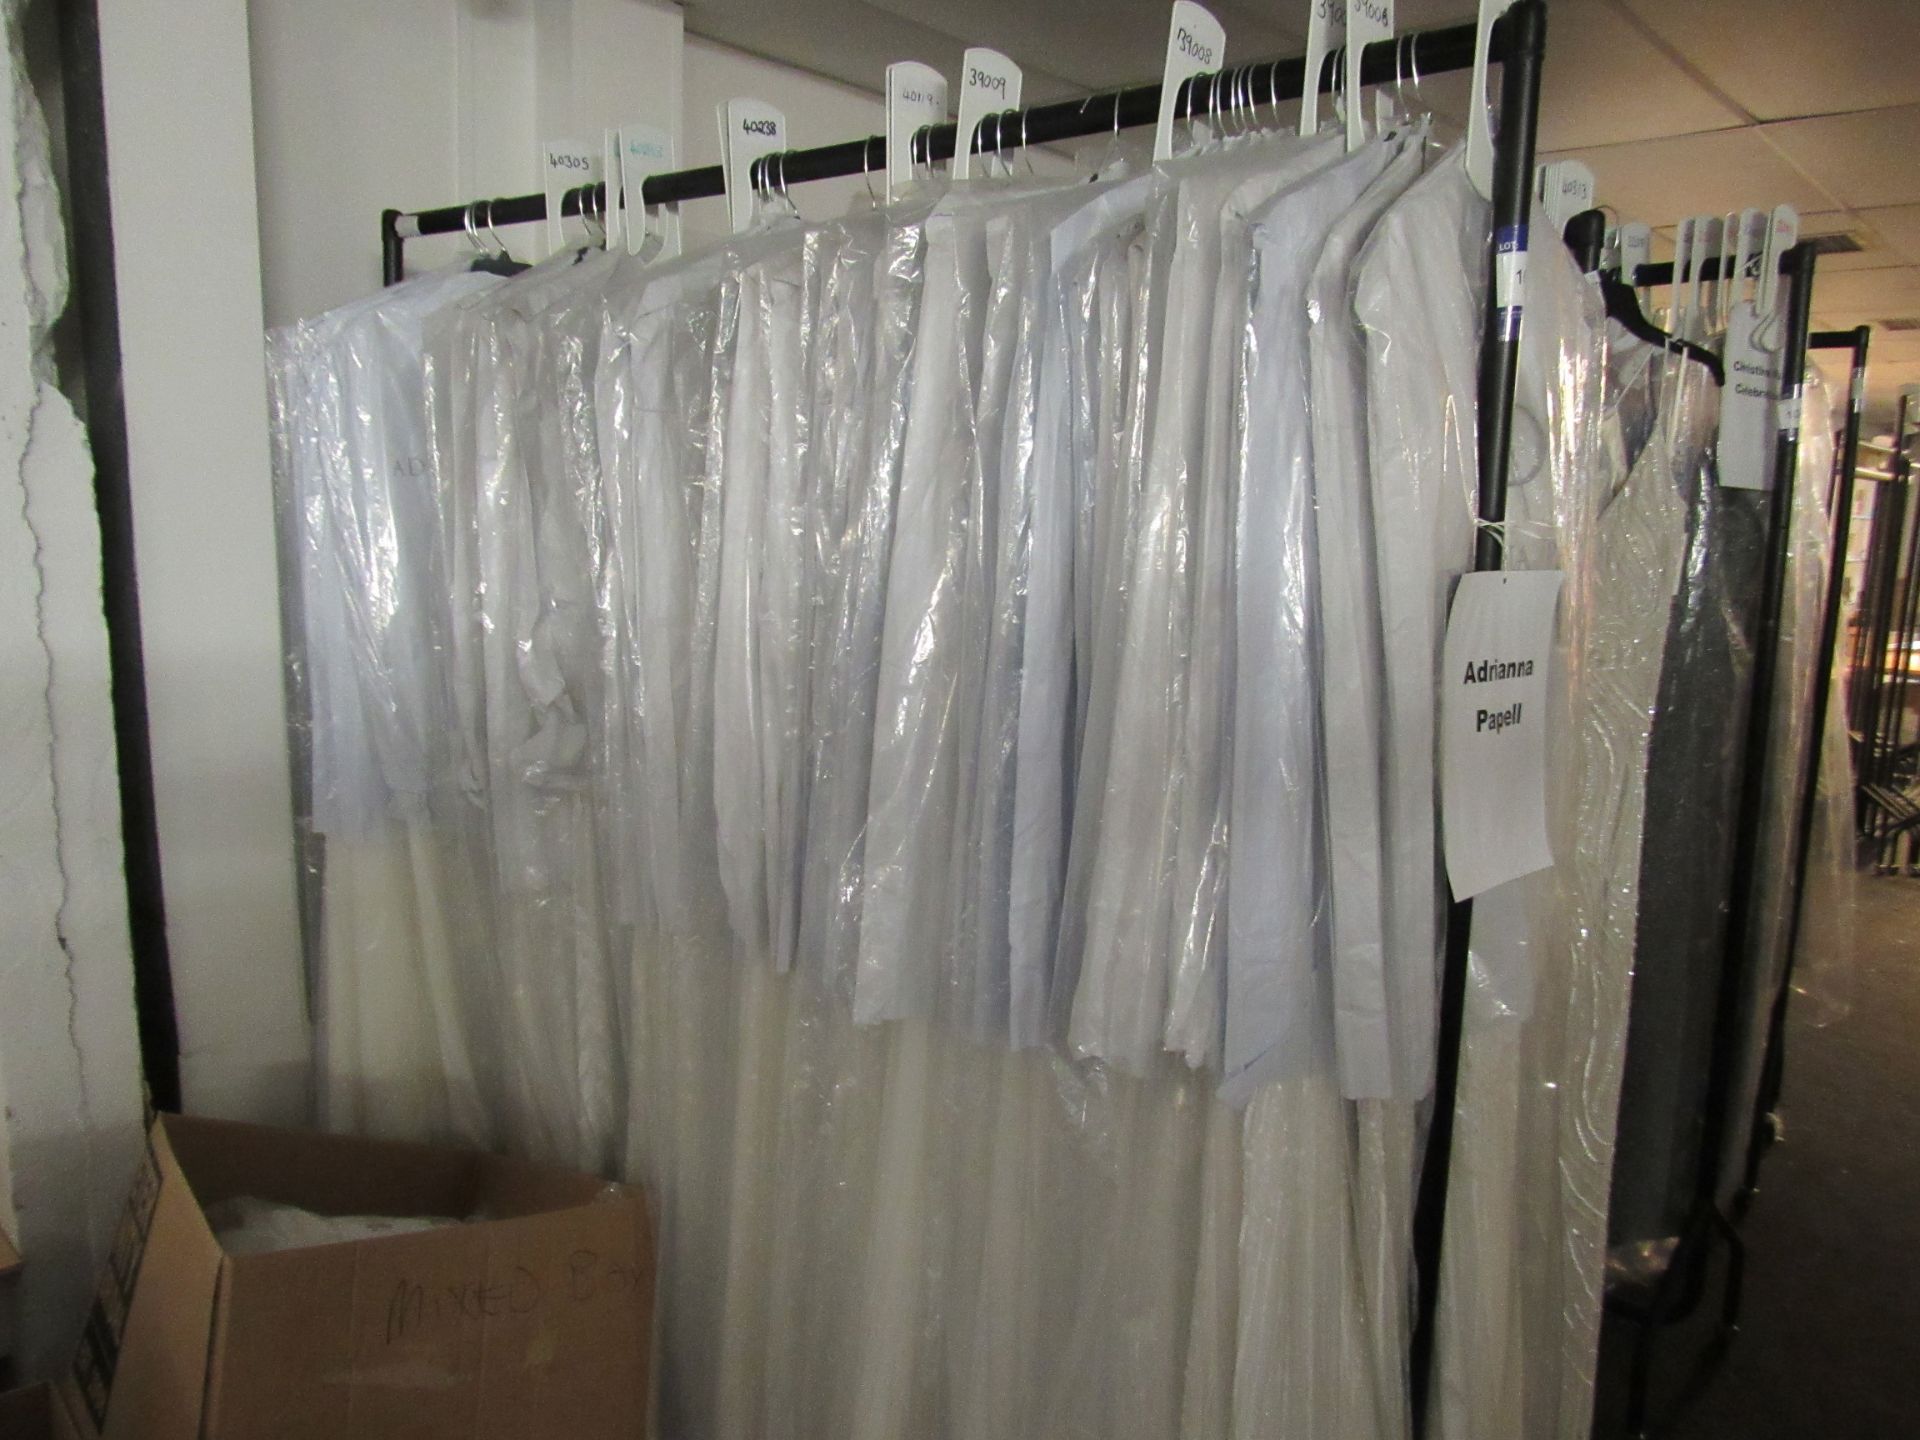 33 Adrianna Papell Bridal gowns to rail - Image 2 of 6